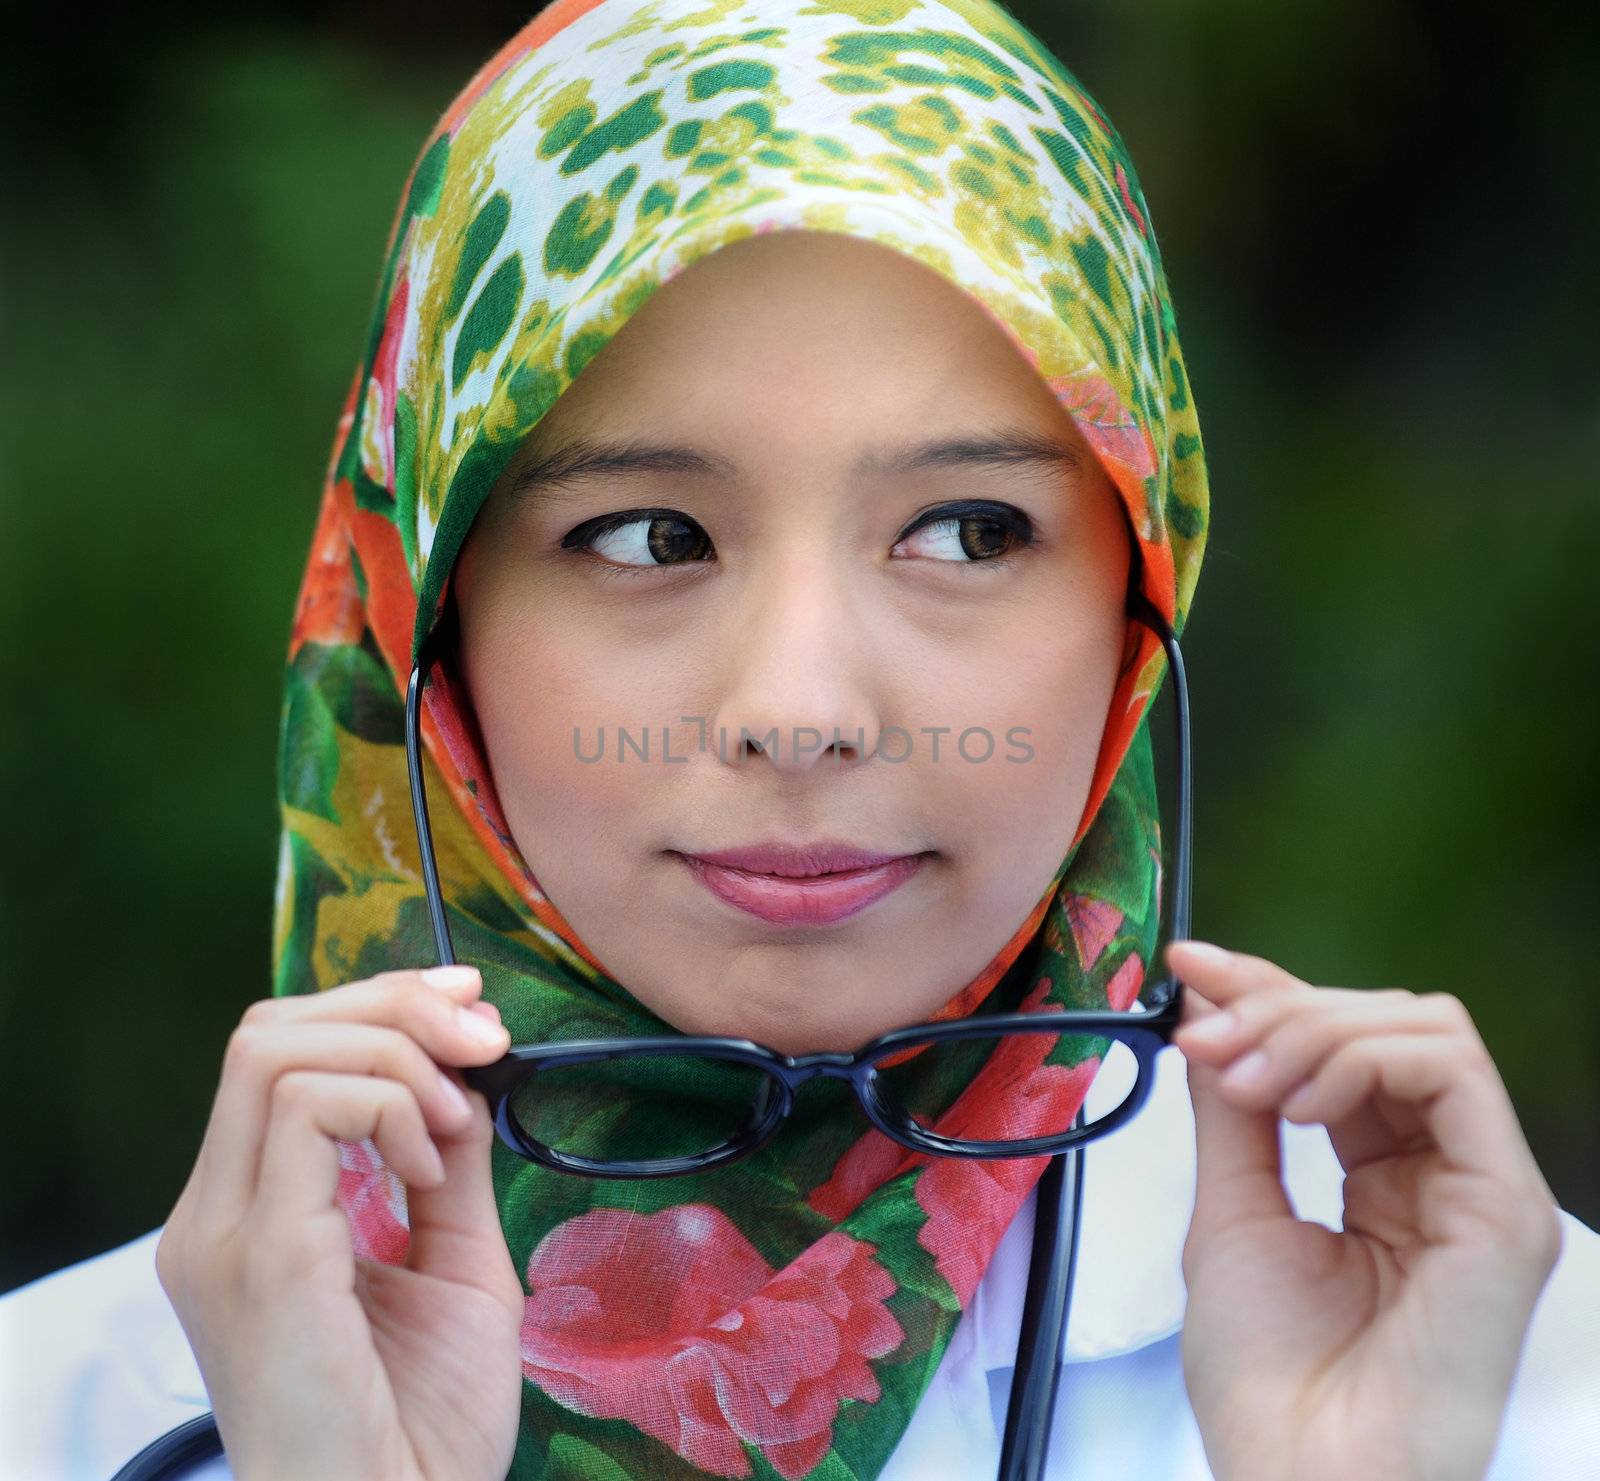 Smile of Scarf Girl with Big Sunglass by jaggat